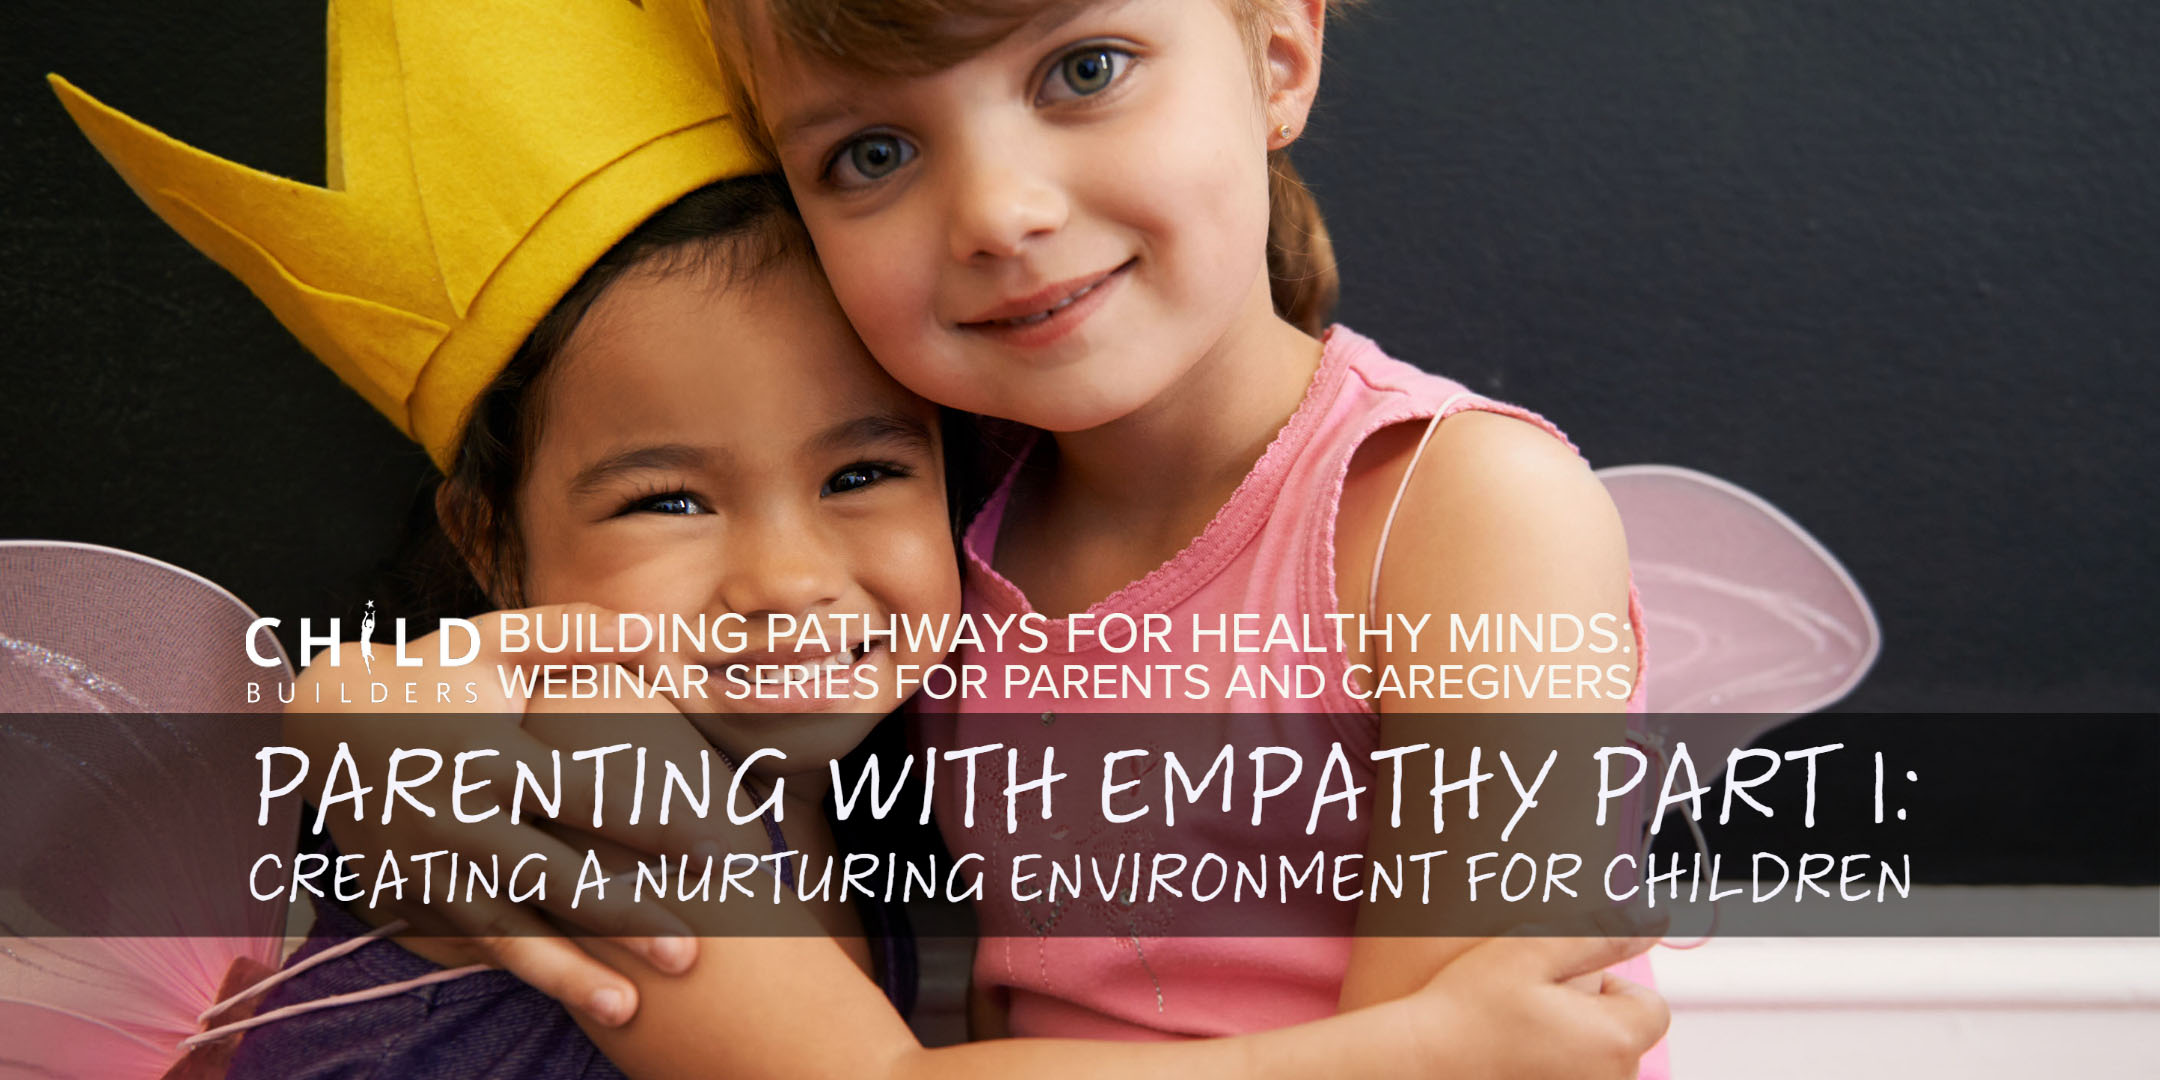 Parenting With Empathy Part 1: Creating a Nurturing Environment for Children